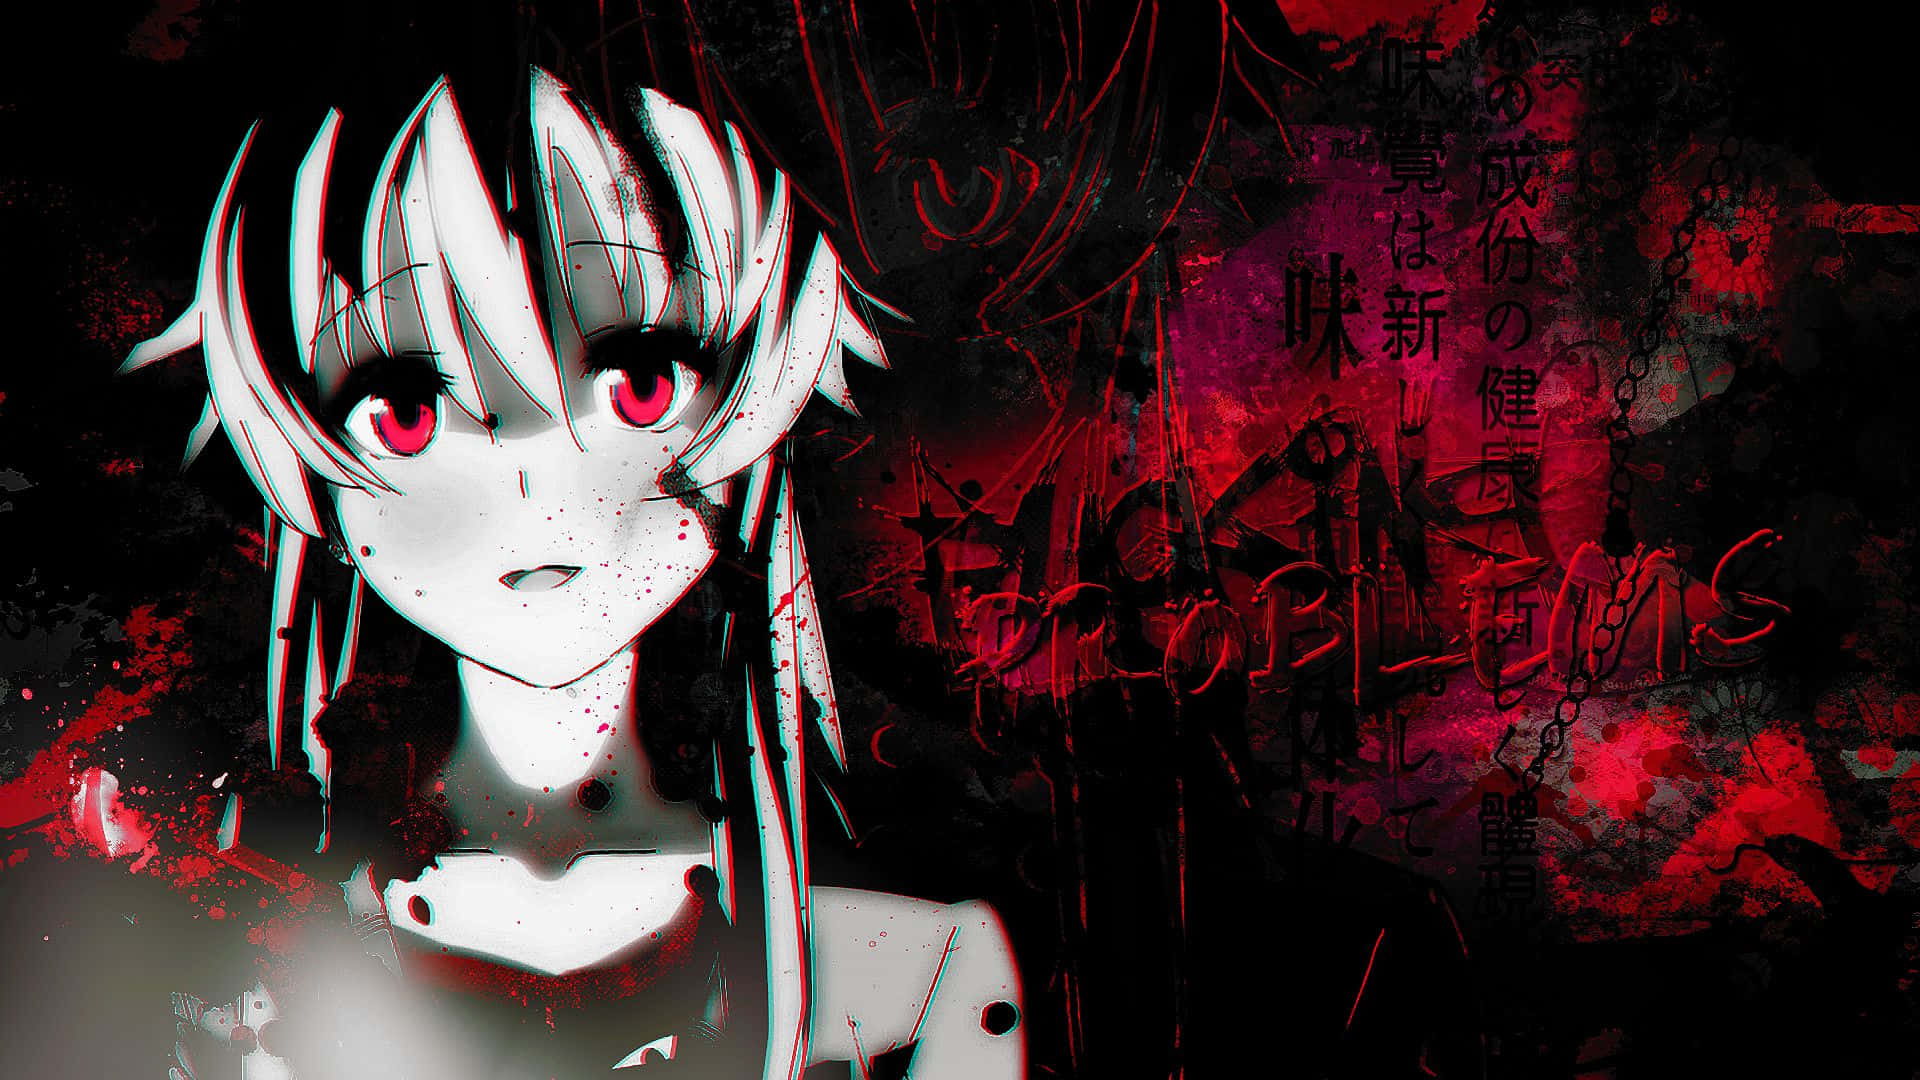 100+] Psycho Anime Girl Wallpapers | Wallpapers.com